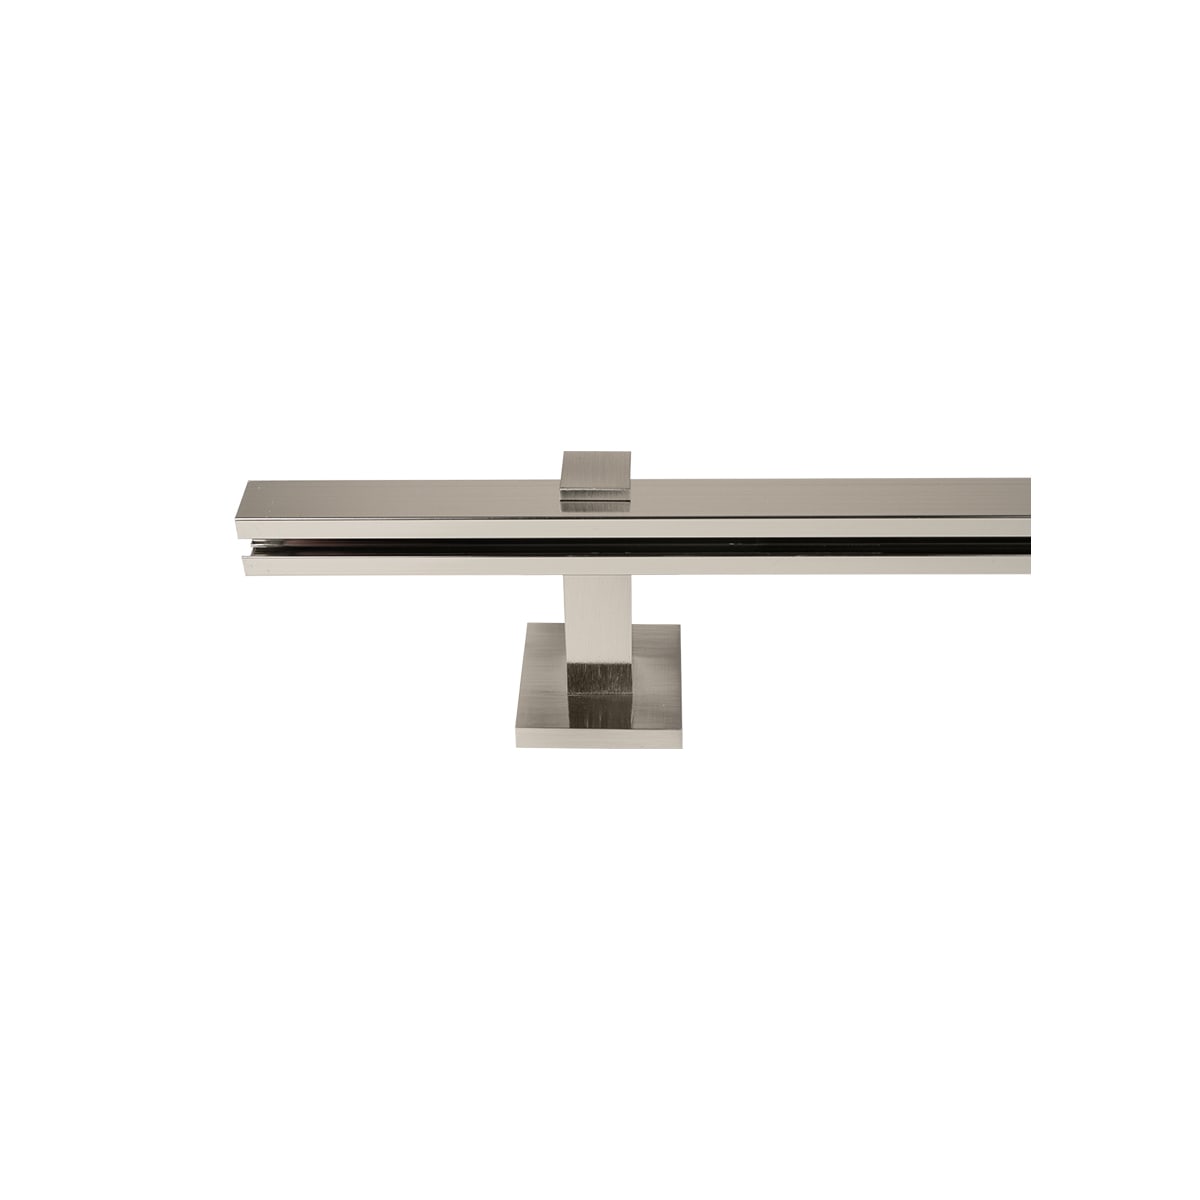 BRUSHED NICKEL SQUARE STAND 8 CM